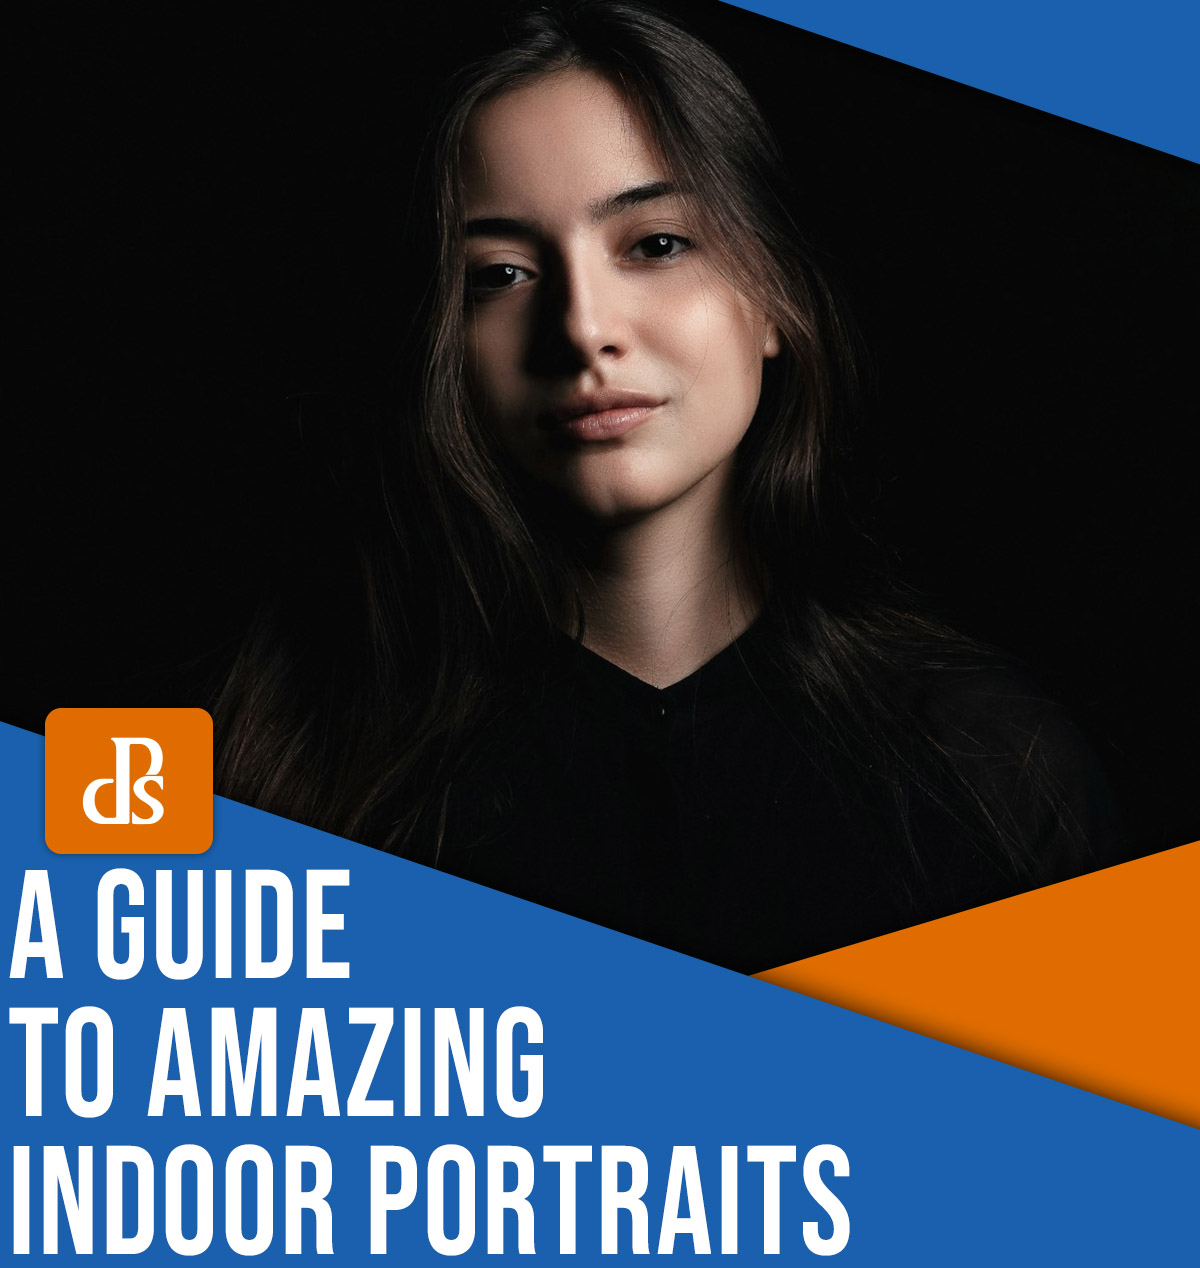 A guide to amazing indoor portraits